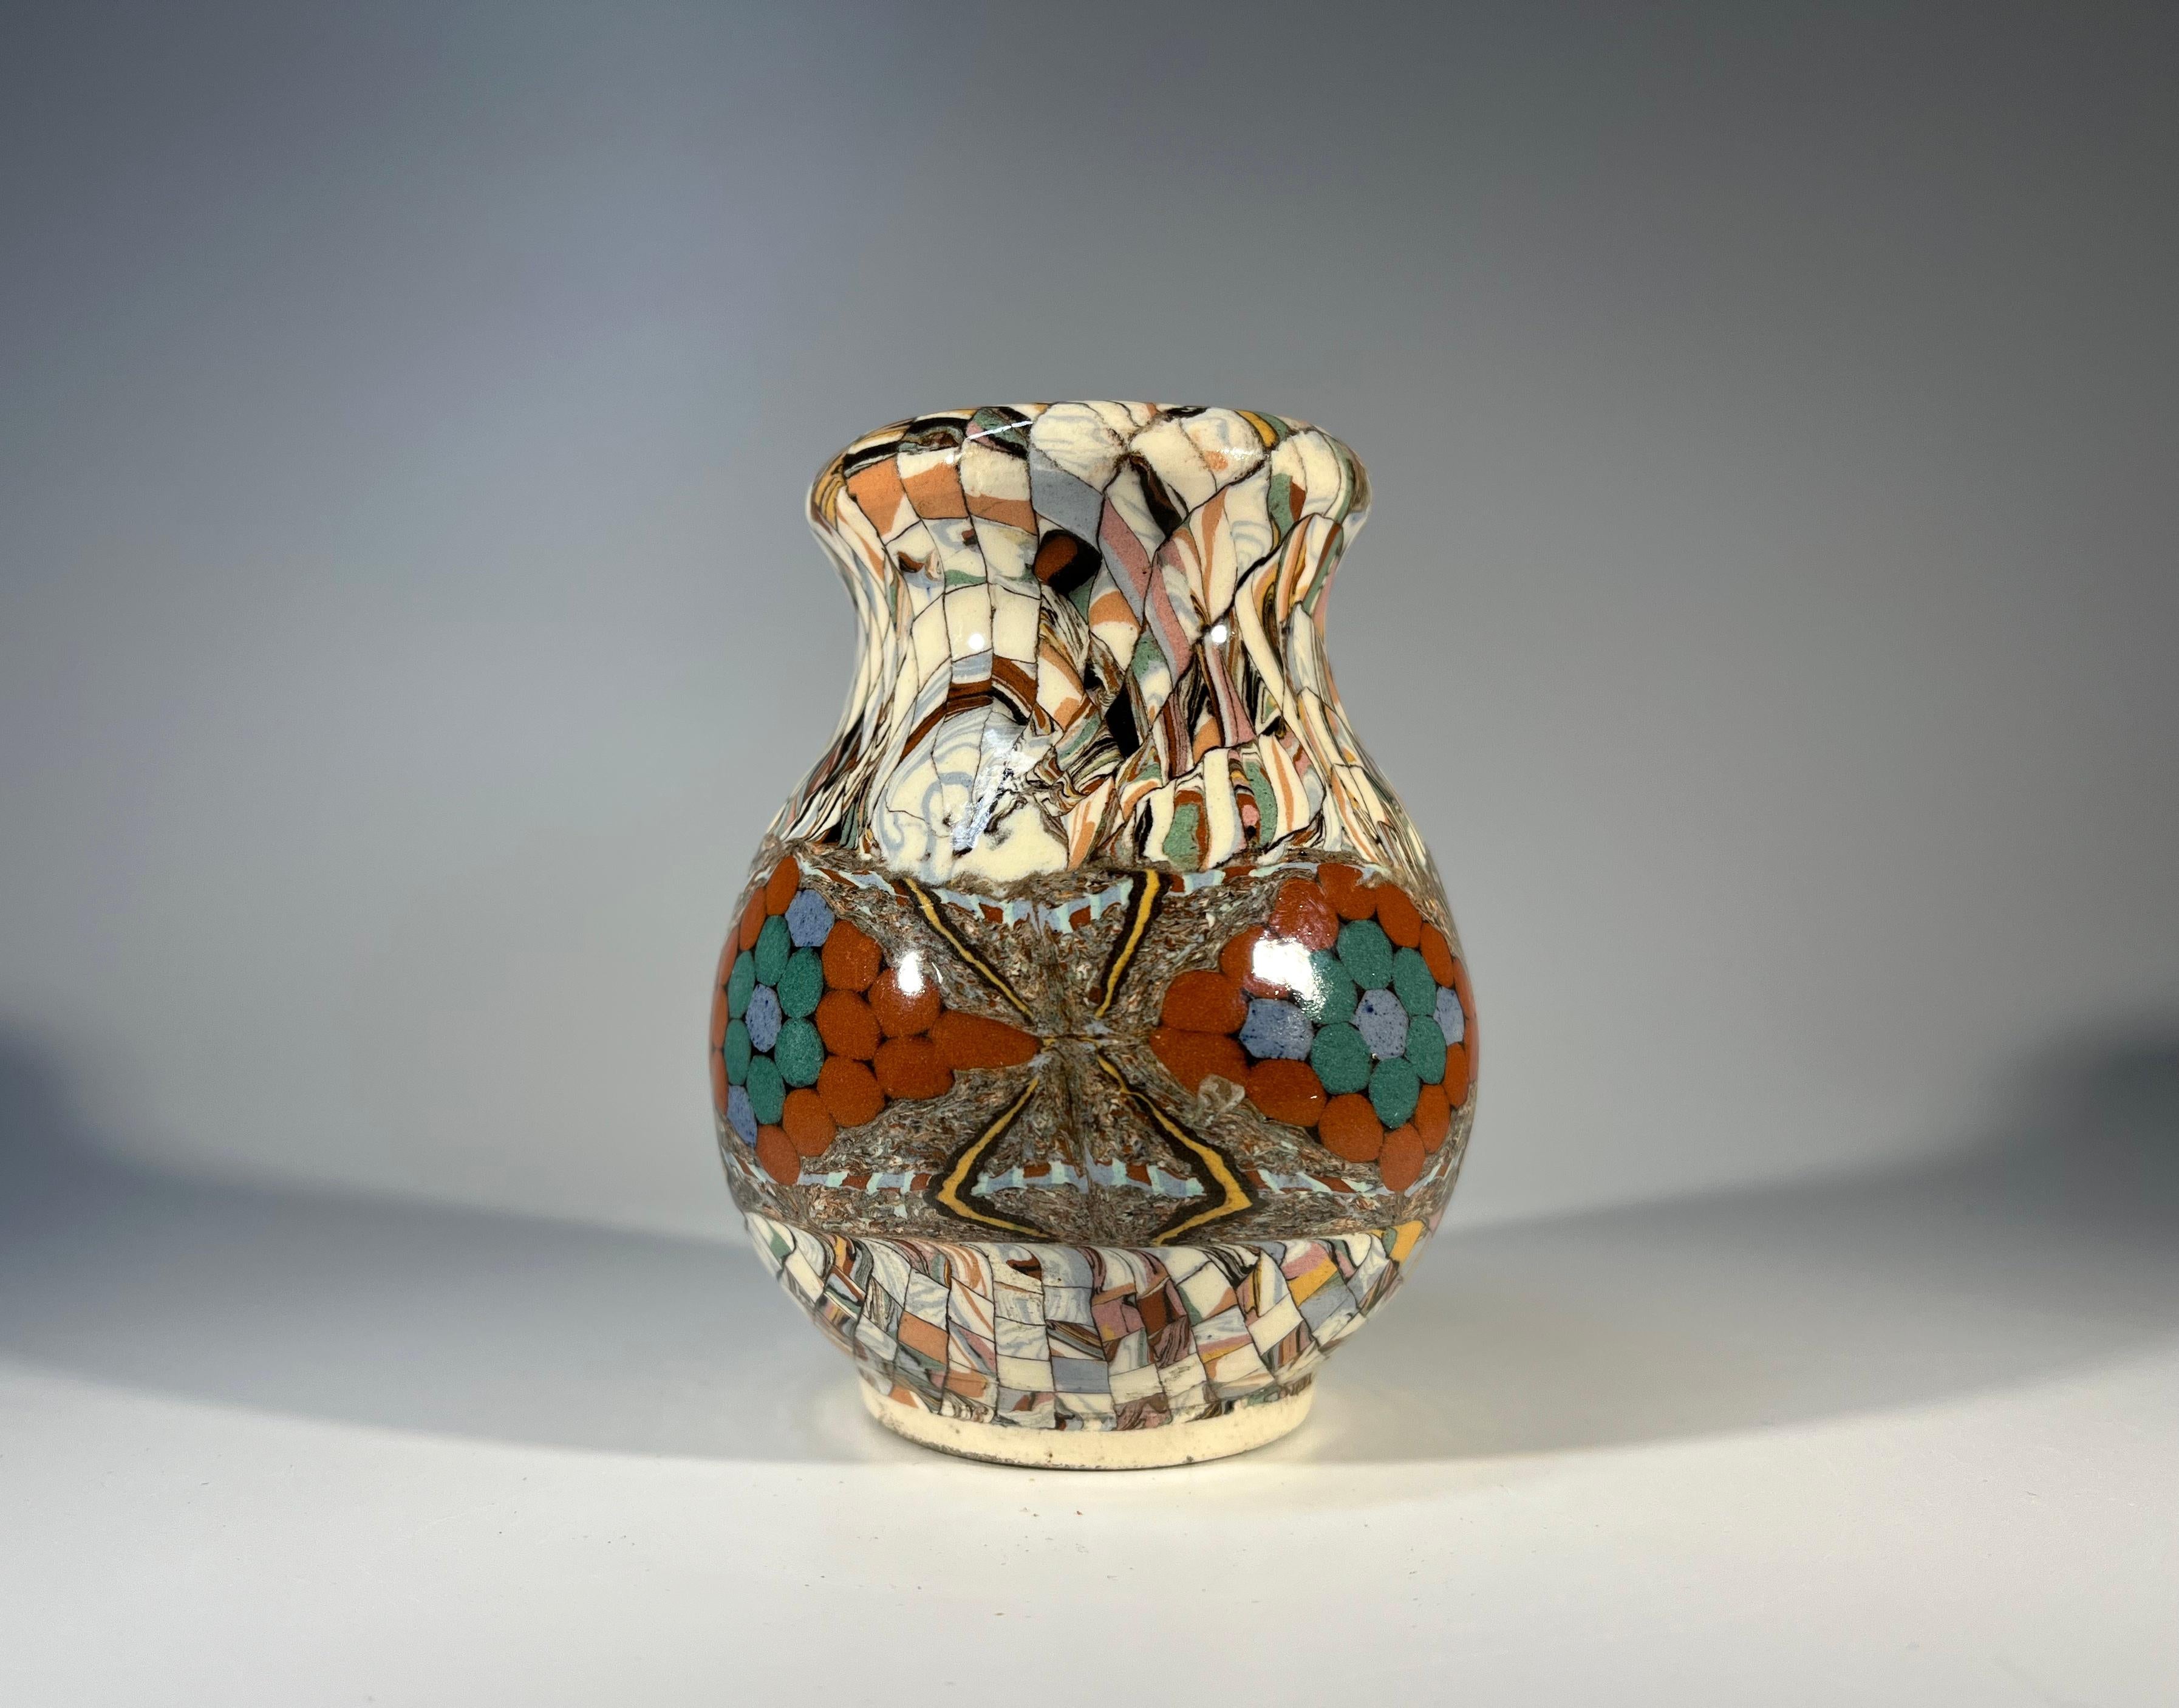 Sweet and diminutive vase using the Neriage technique by Jean Gerbino for Vallauris, France
Ceramic glazed shaped vase, with mosaic patterning and terracotta accents
Circa 1960's
Signed Vallauris Gerbino to base
Height 3.5 inch, Diameter 2.75